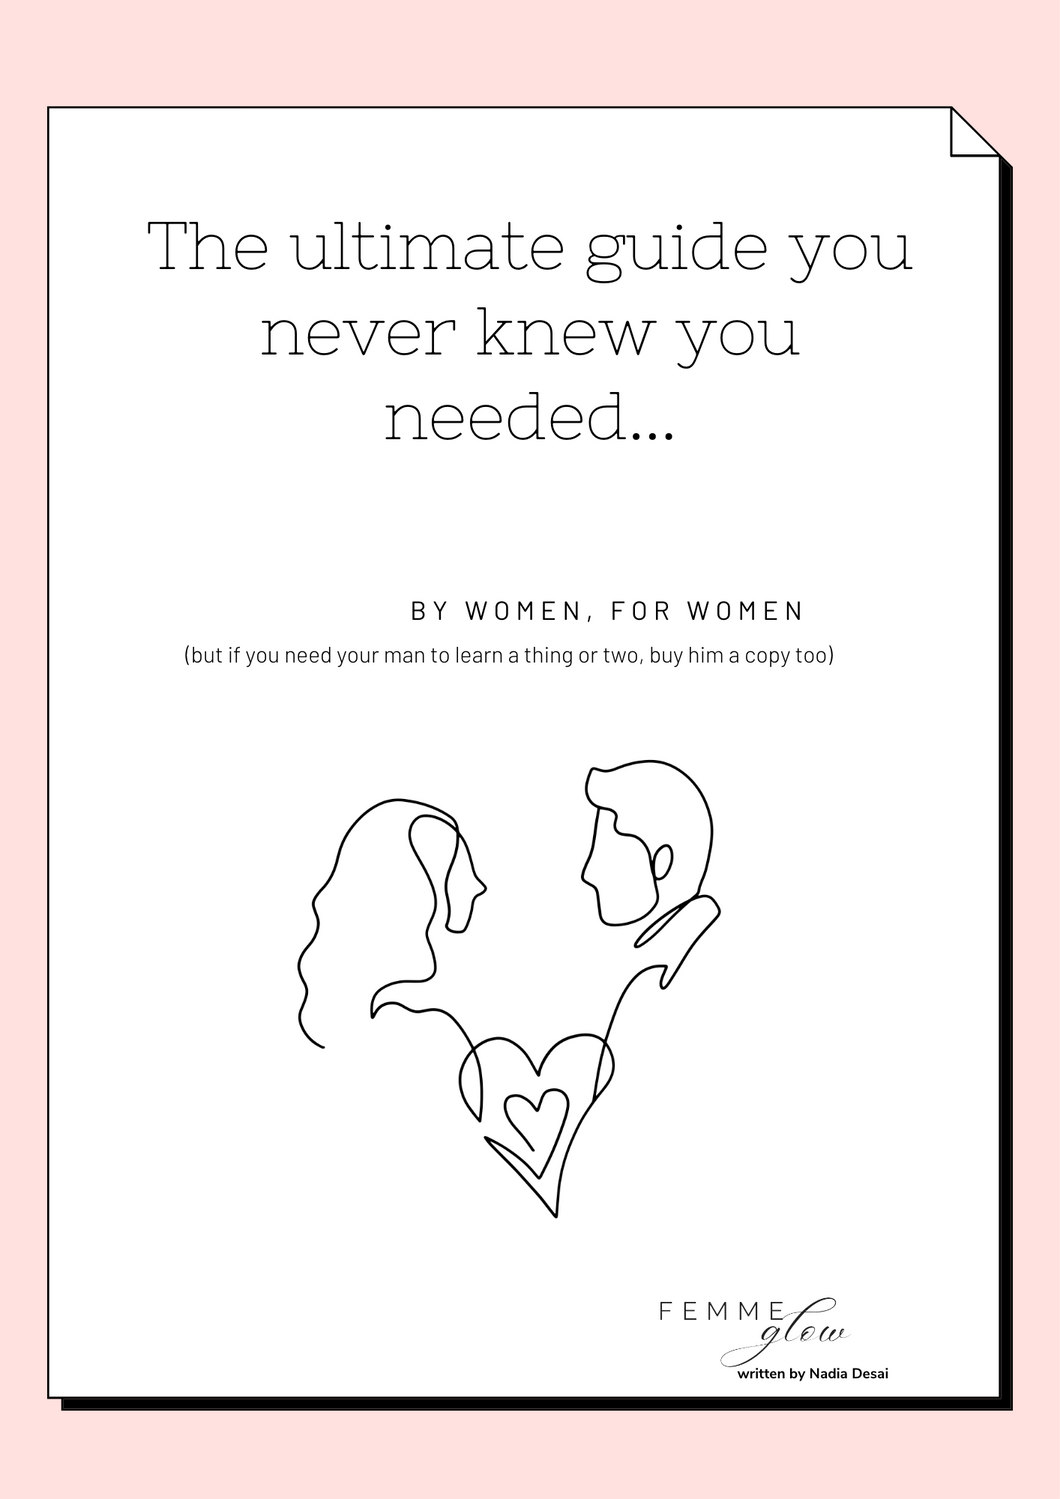 The ultimate guide you never knew you needed...